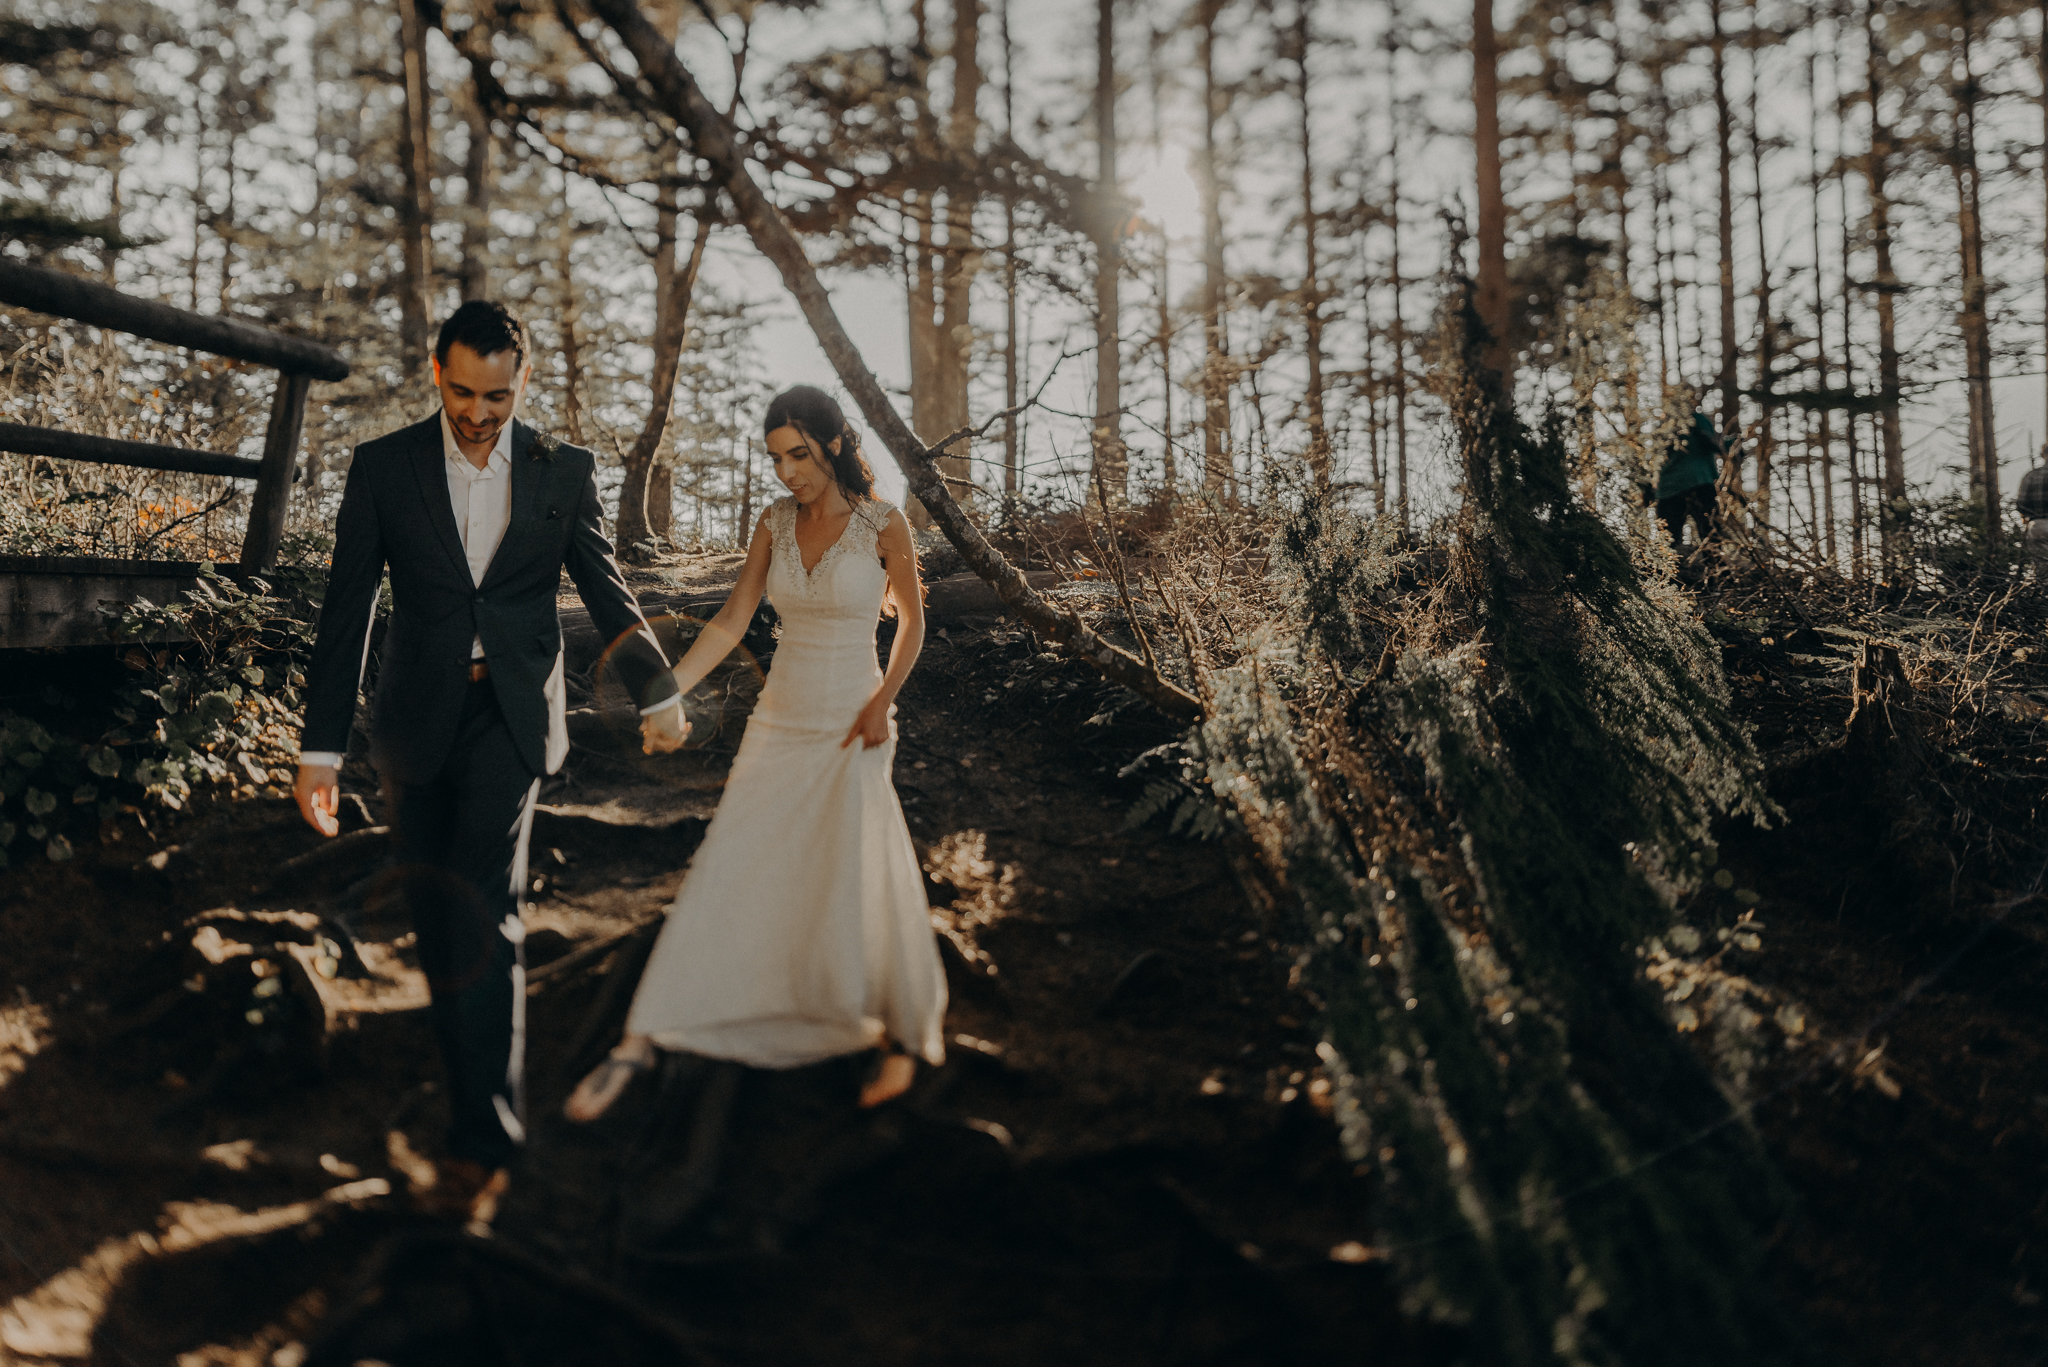 Isaiah + Taylor Photography - Cape Flattery Elopement, Olympia National Forest Wedding Photographer-088.jpg